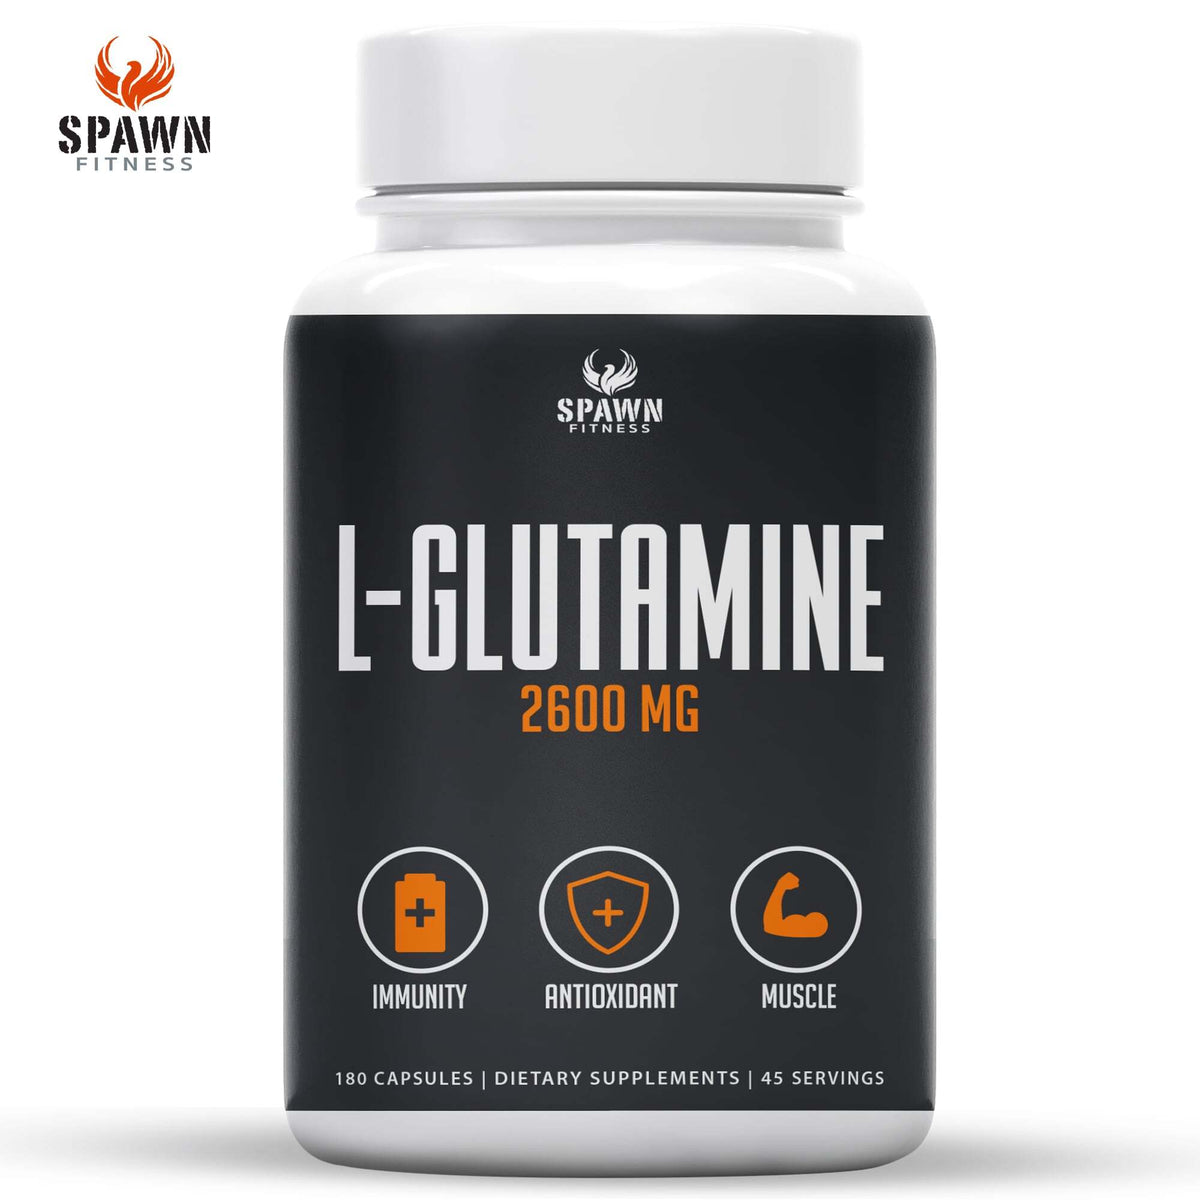 Spawn Fitness L-Glutamine Capsules Amino Acids Workout Supplement Musc